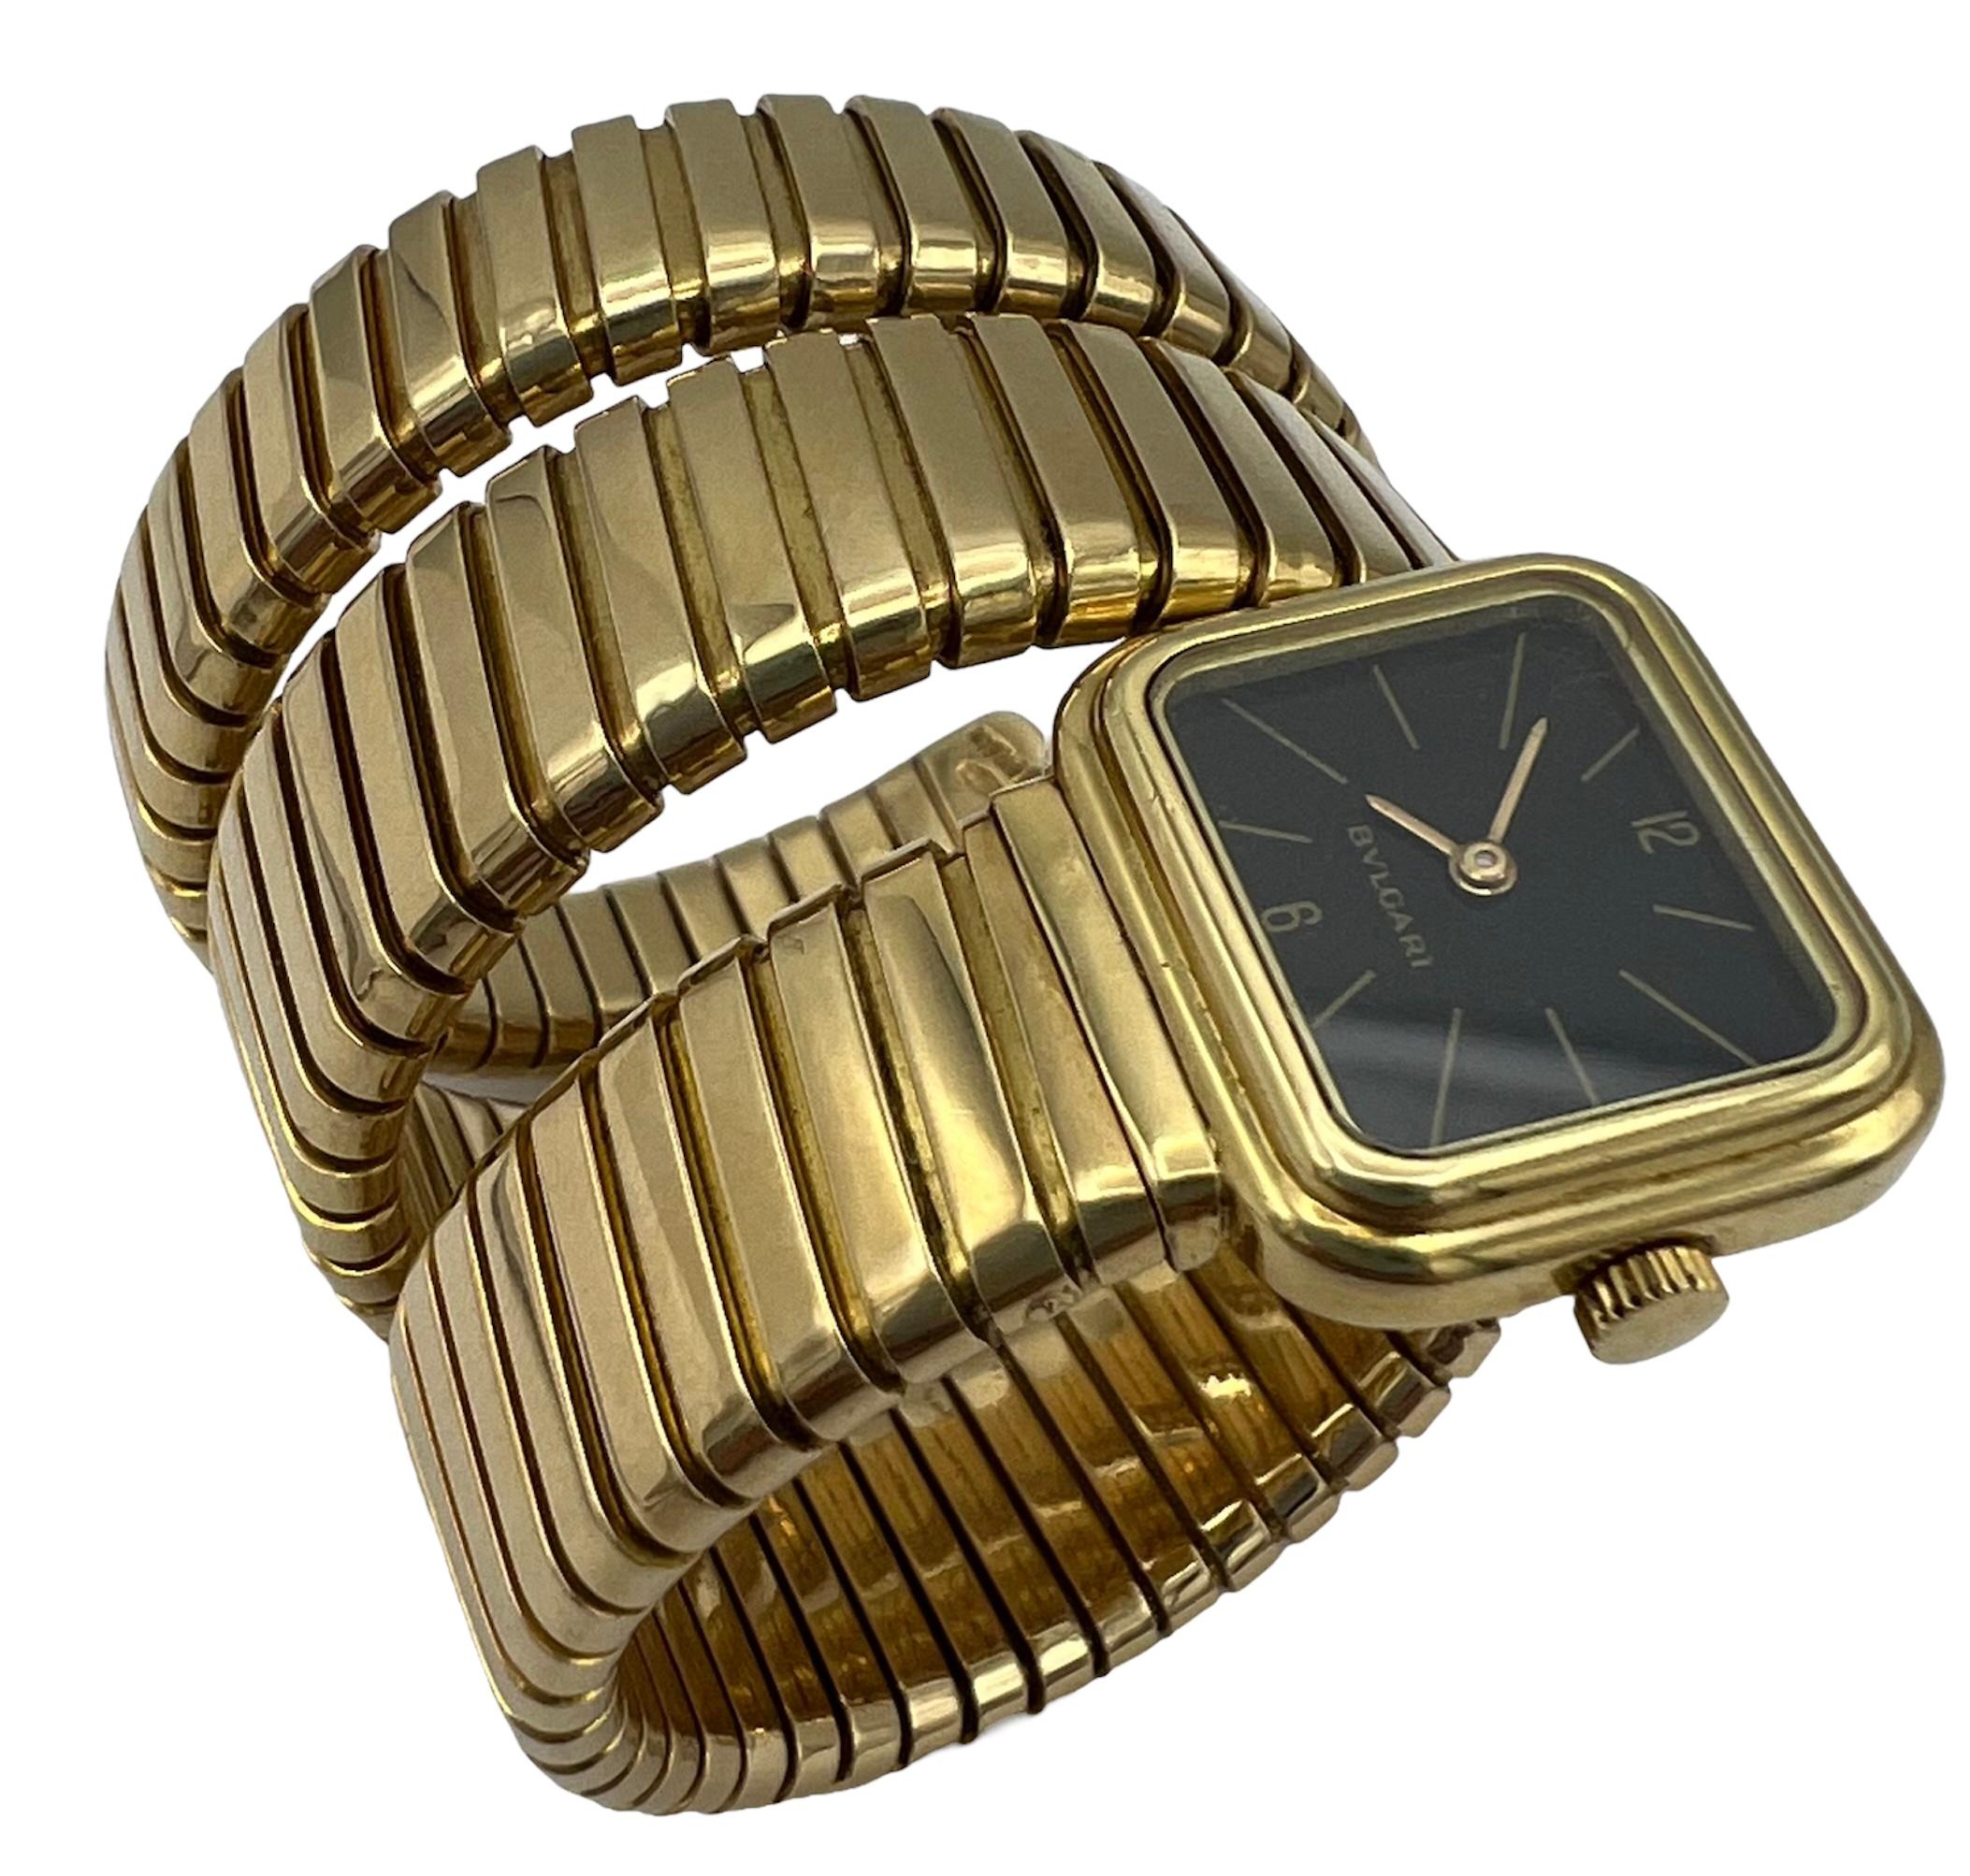 DESIGNER: Bulgari
CIRCA: 1960’s- 1980’s
MATERIALS: 18K Yellow Gold
WEIGHT: 117.8 grams
MEASUREMENTS: Fits up to 5.5, The Face: 1/2” x 5/8”
HALLMARKS: BVLGARI, G.1113.4, 15776
ITEM DETAILS:
A rare vintage Bulgari Tubogas watch, made of 18k yellow